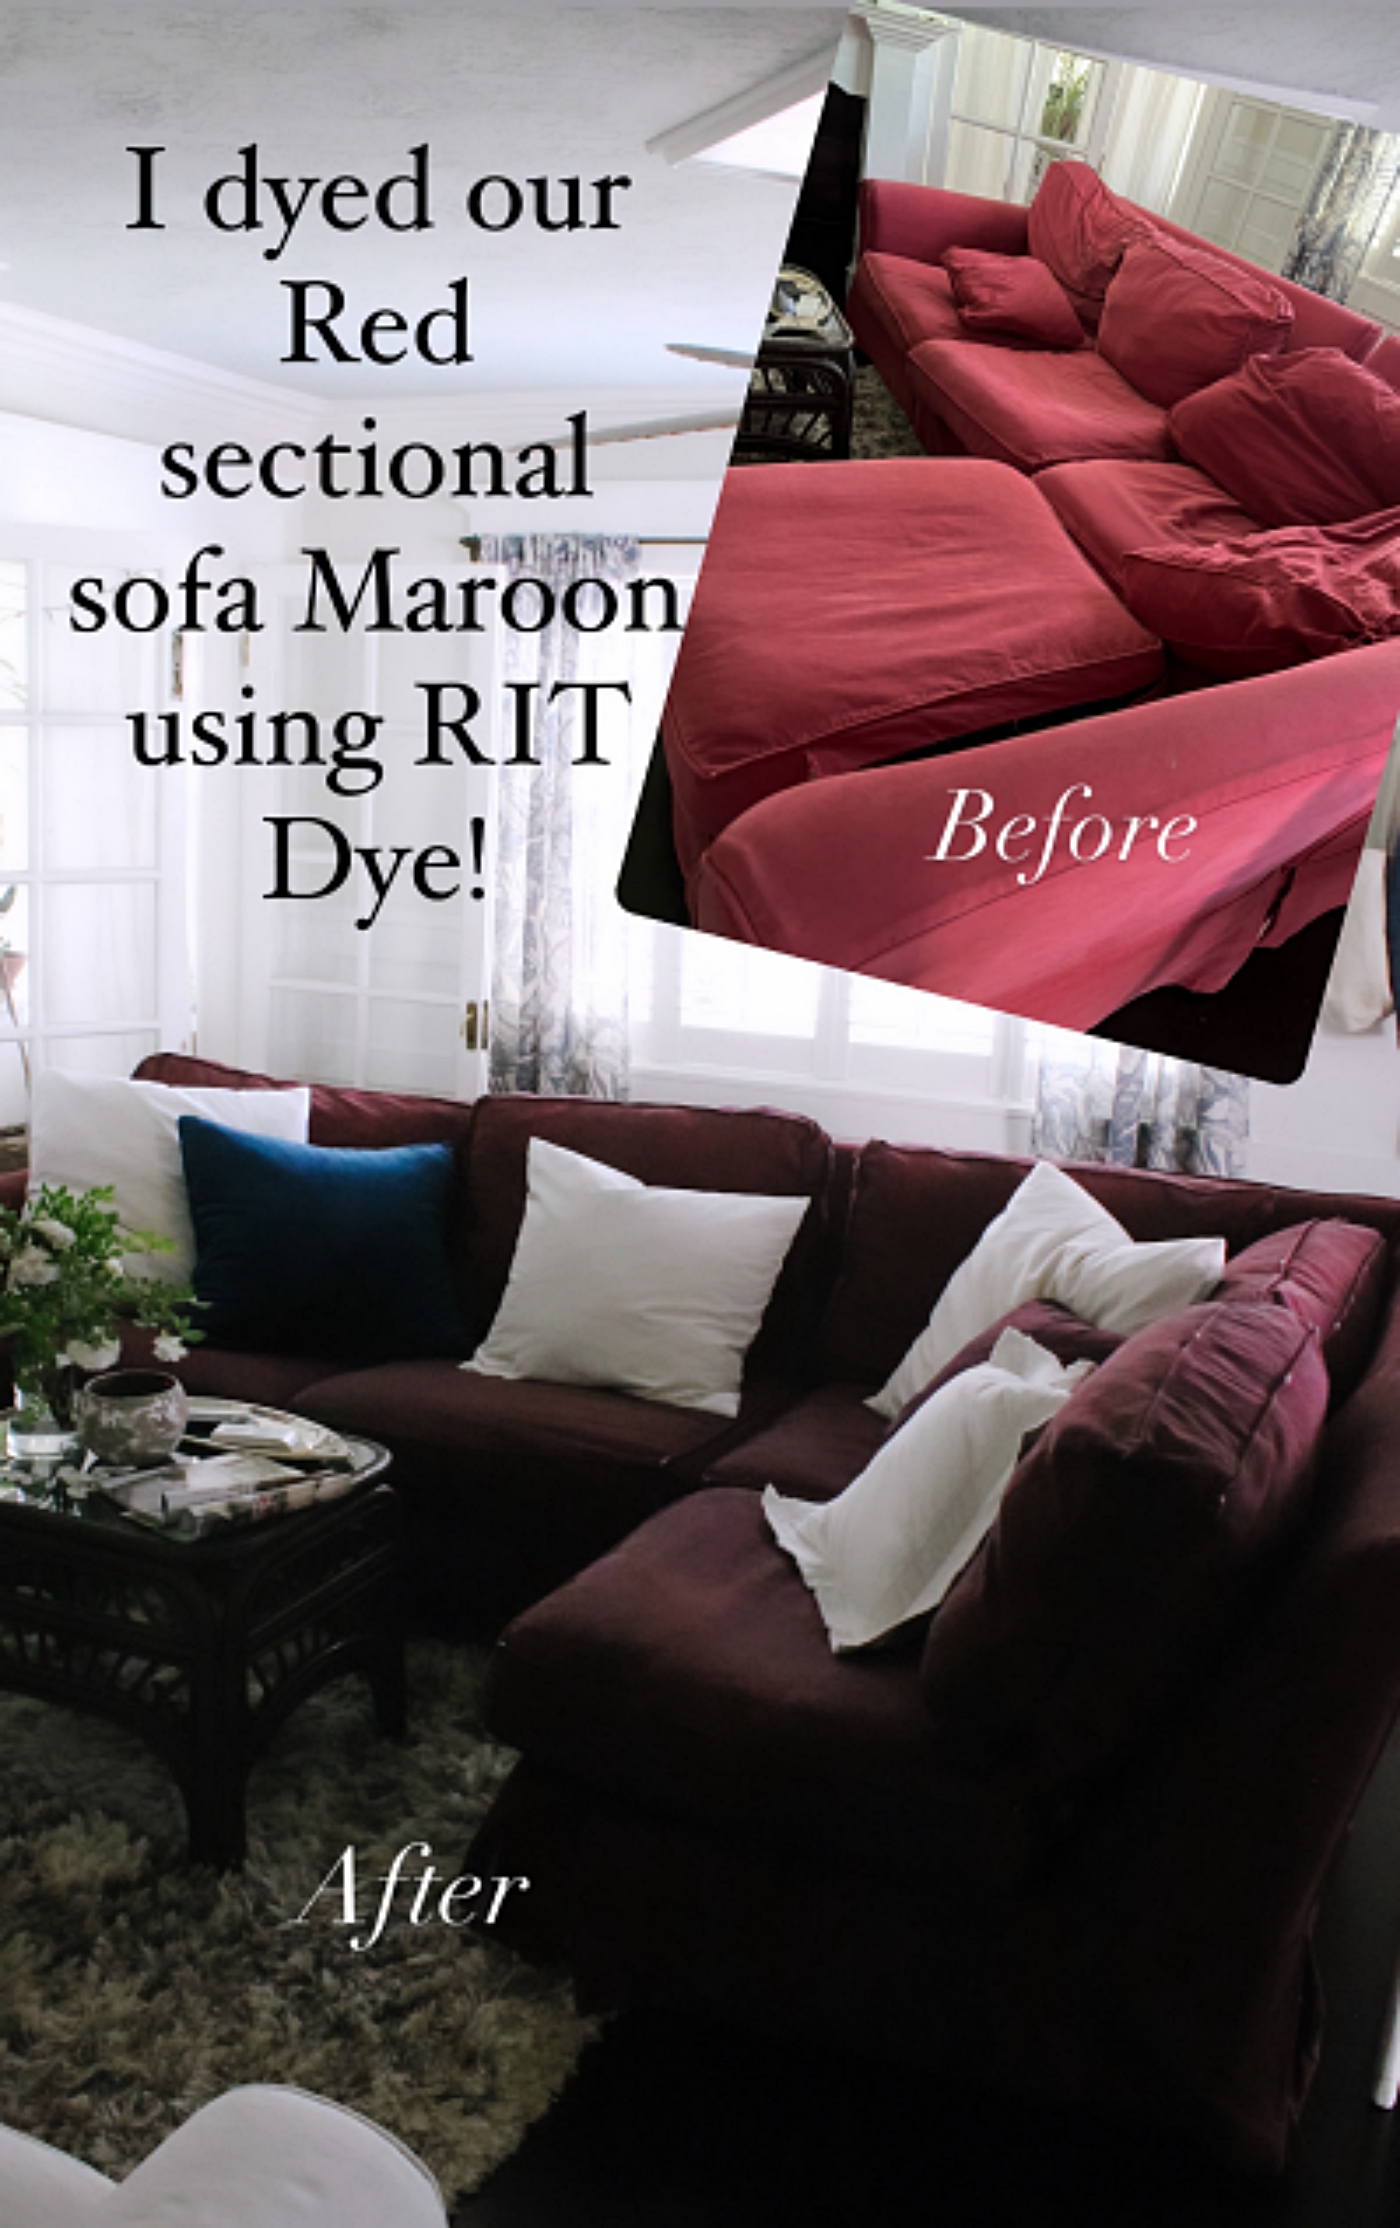 I Dyed Our Red Sectional Couch Slipcovers Maroon using RIT Dye.